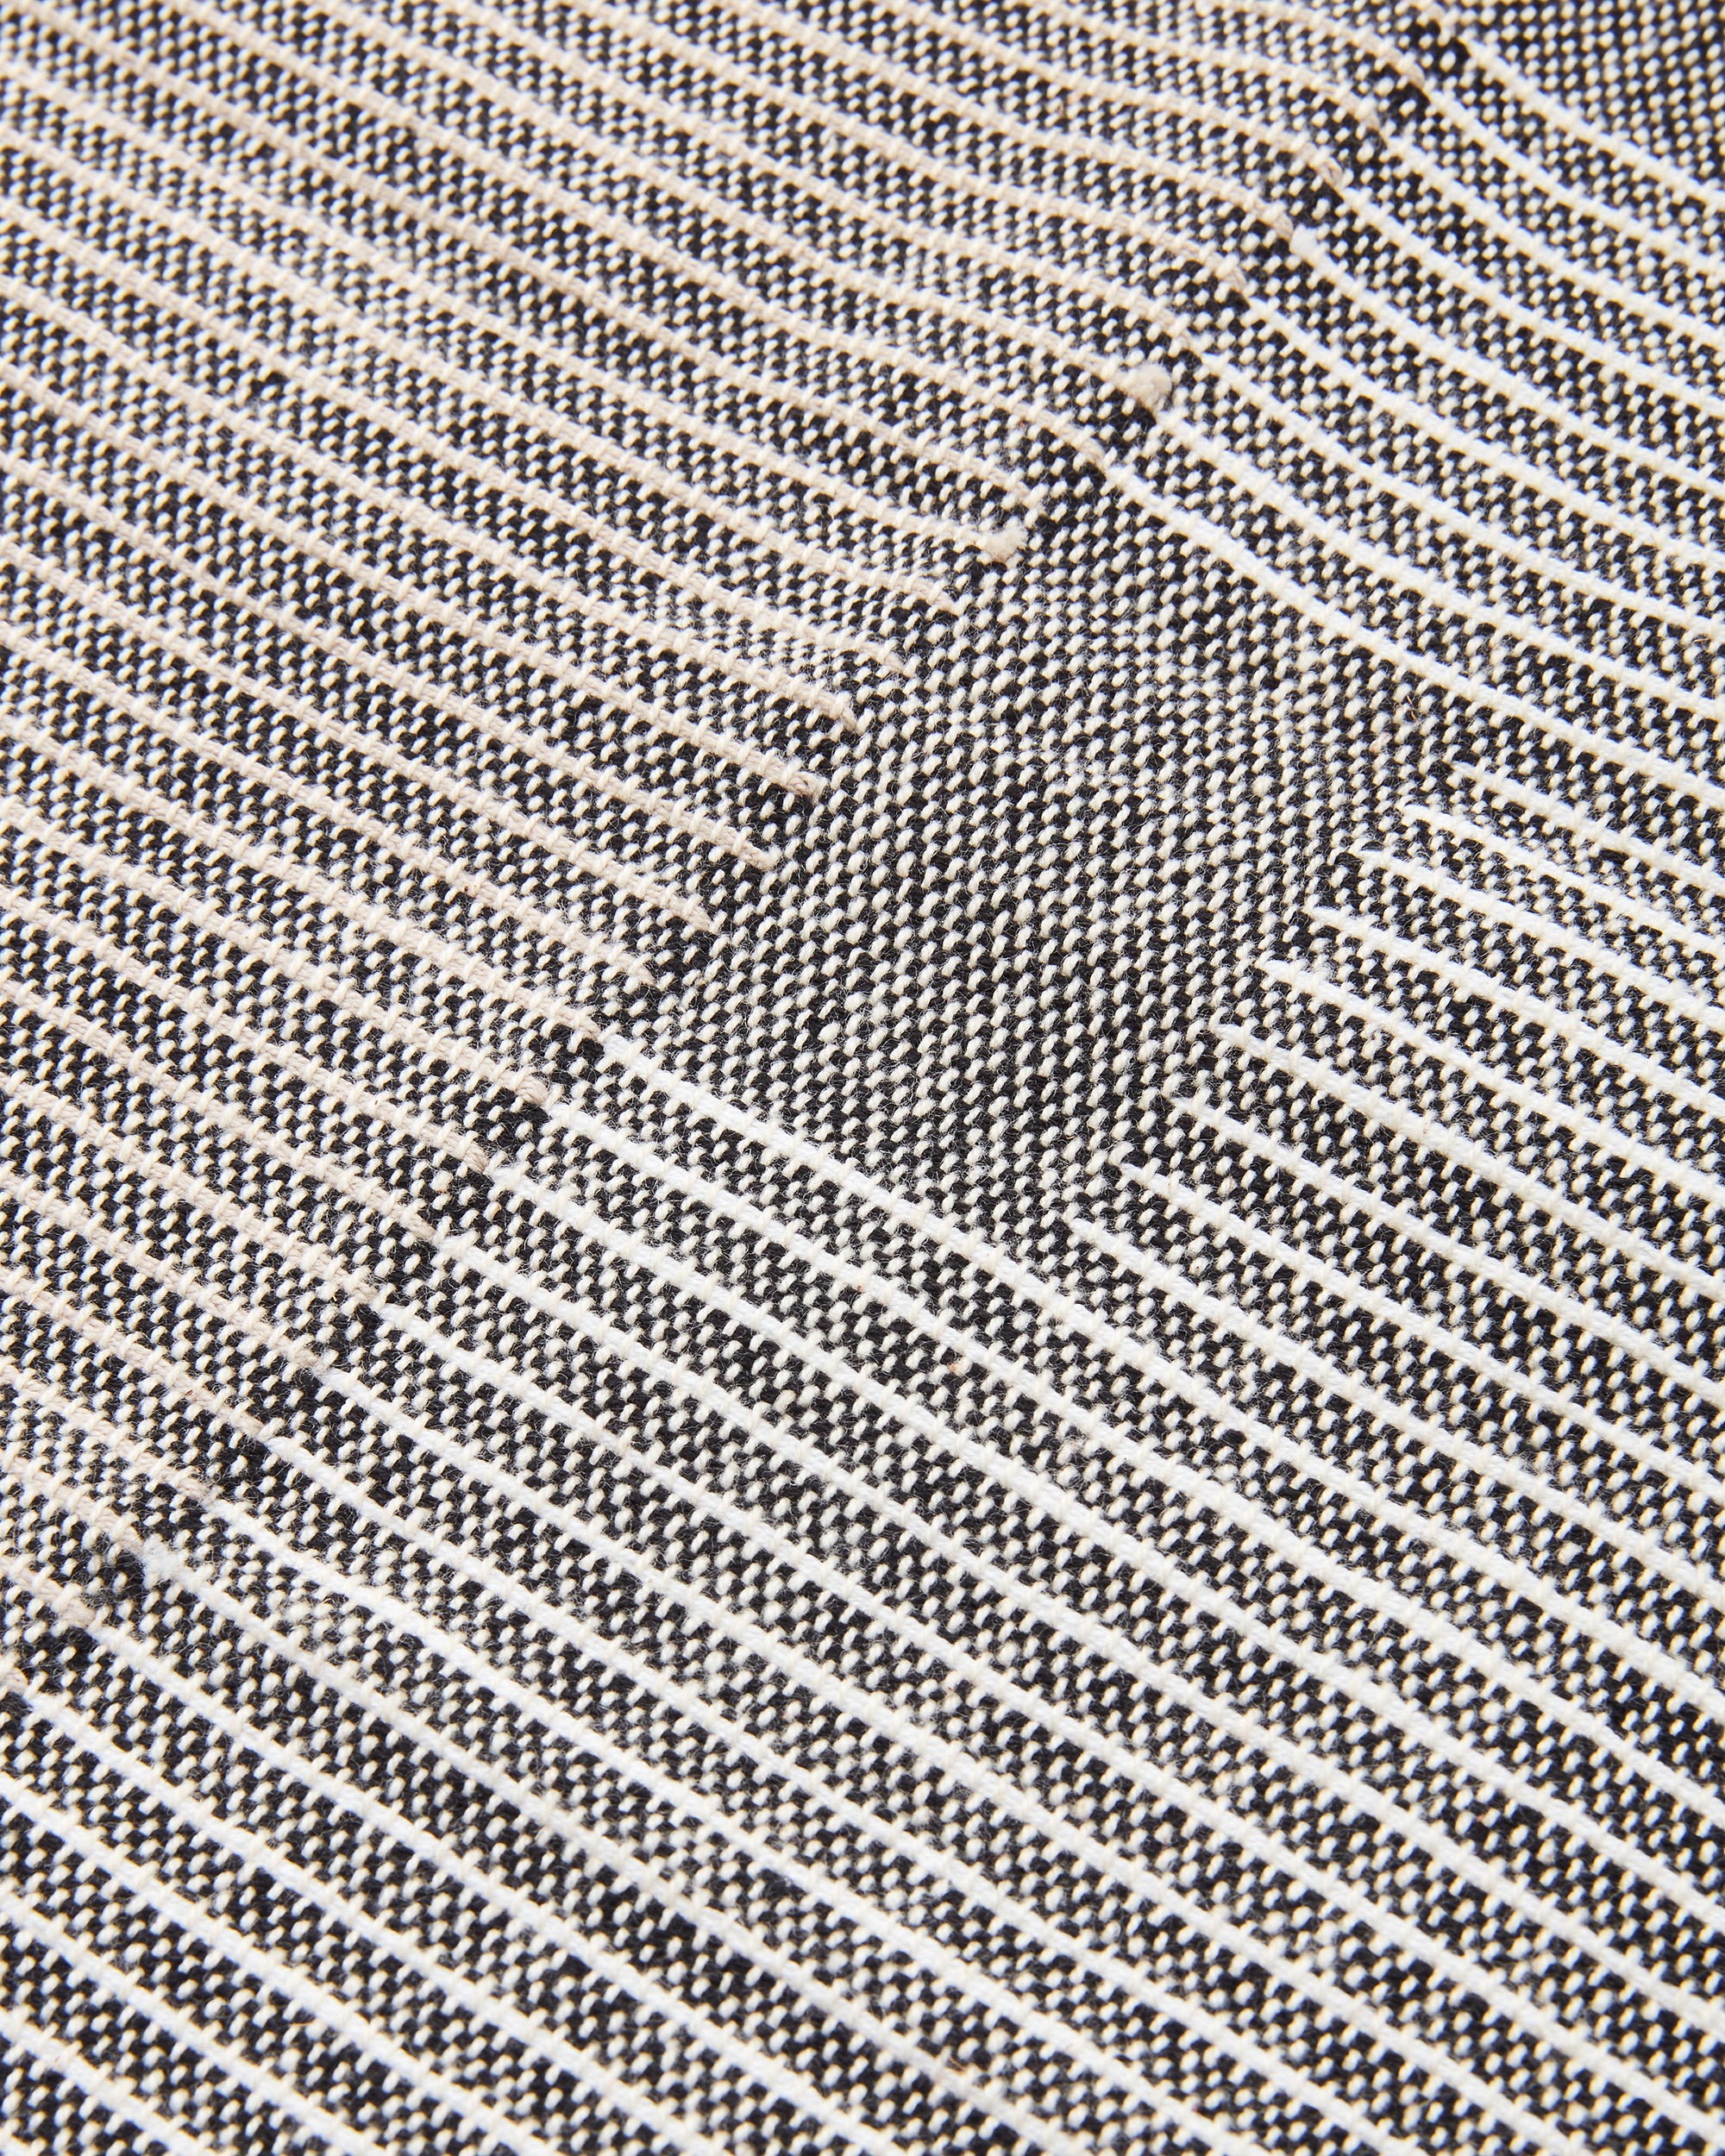 close up detail MINNA ethically handwoven Oeko Tex cotton napkin with grey background and white details